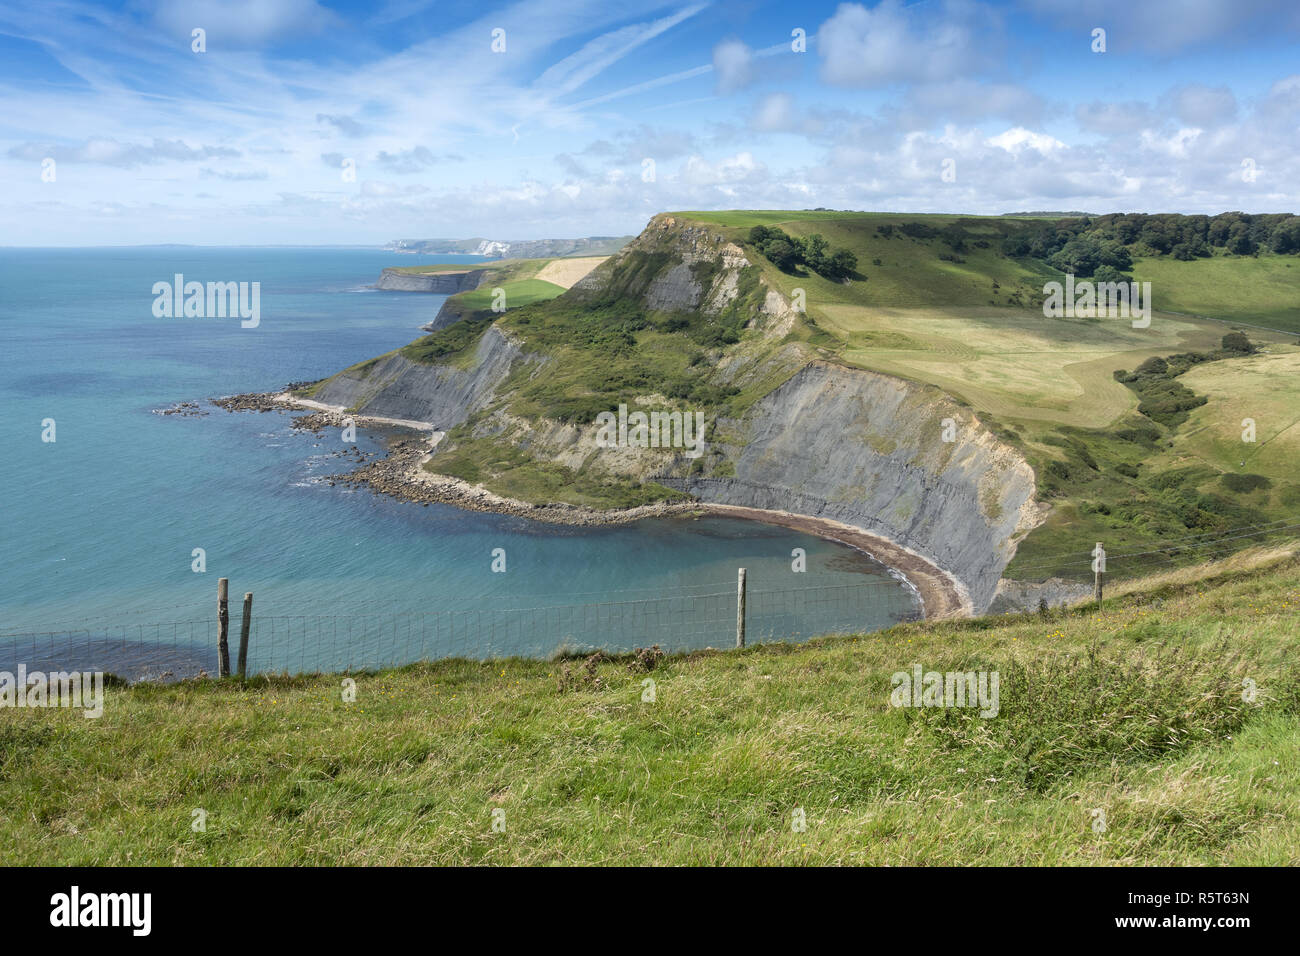 View from Emmetts Hill over Chapman's Pool on the Isle of Purbeck, Dorset, England, UK Stock Photo